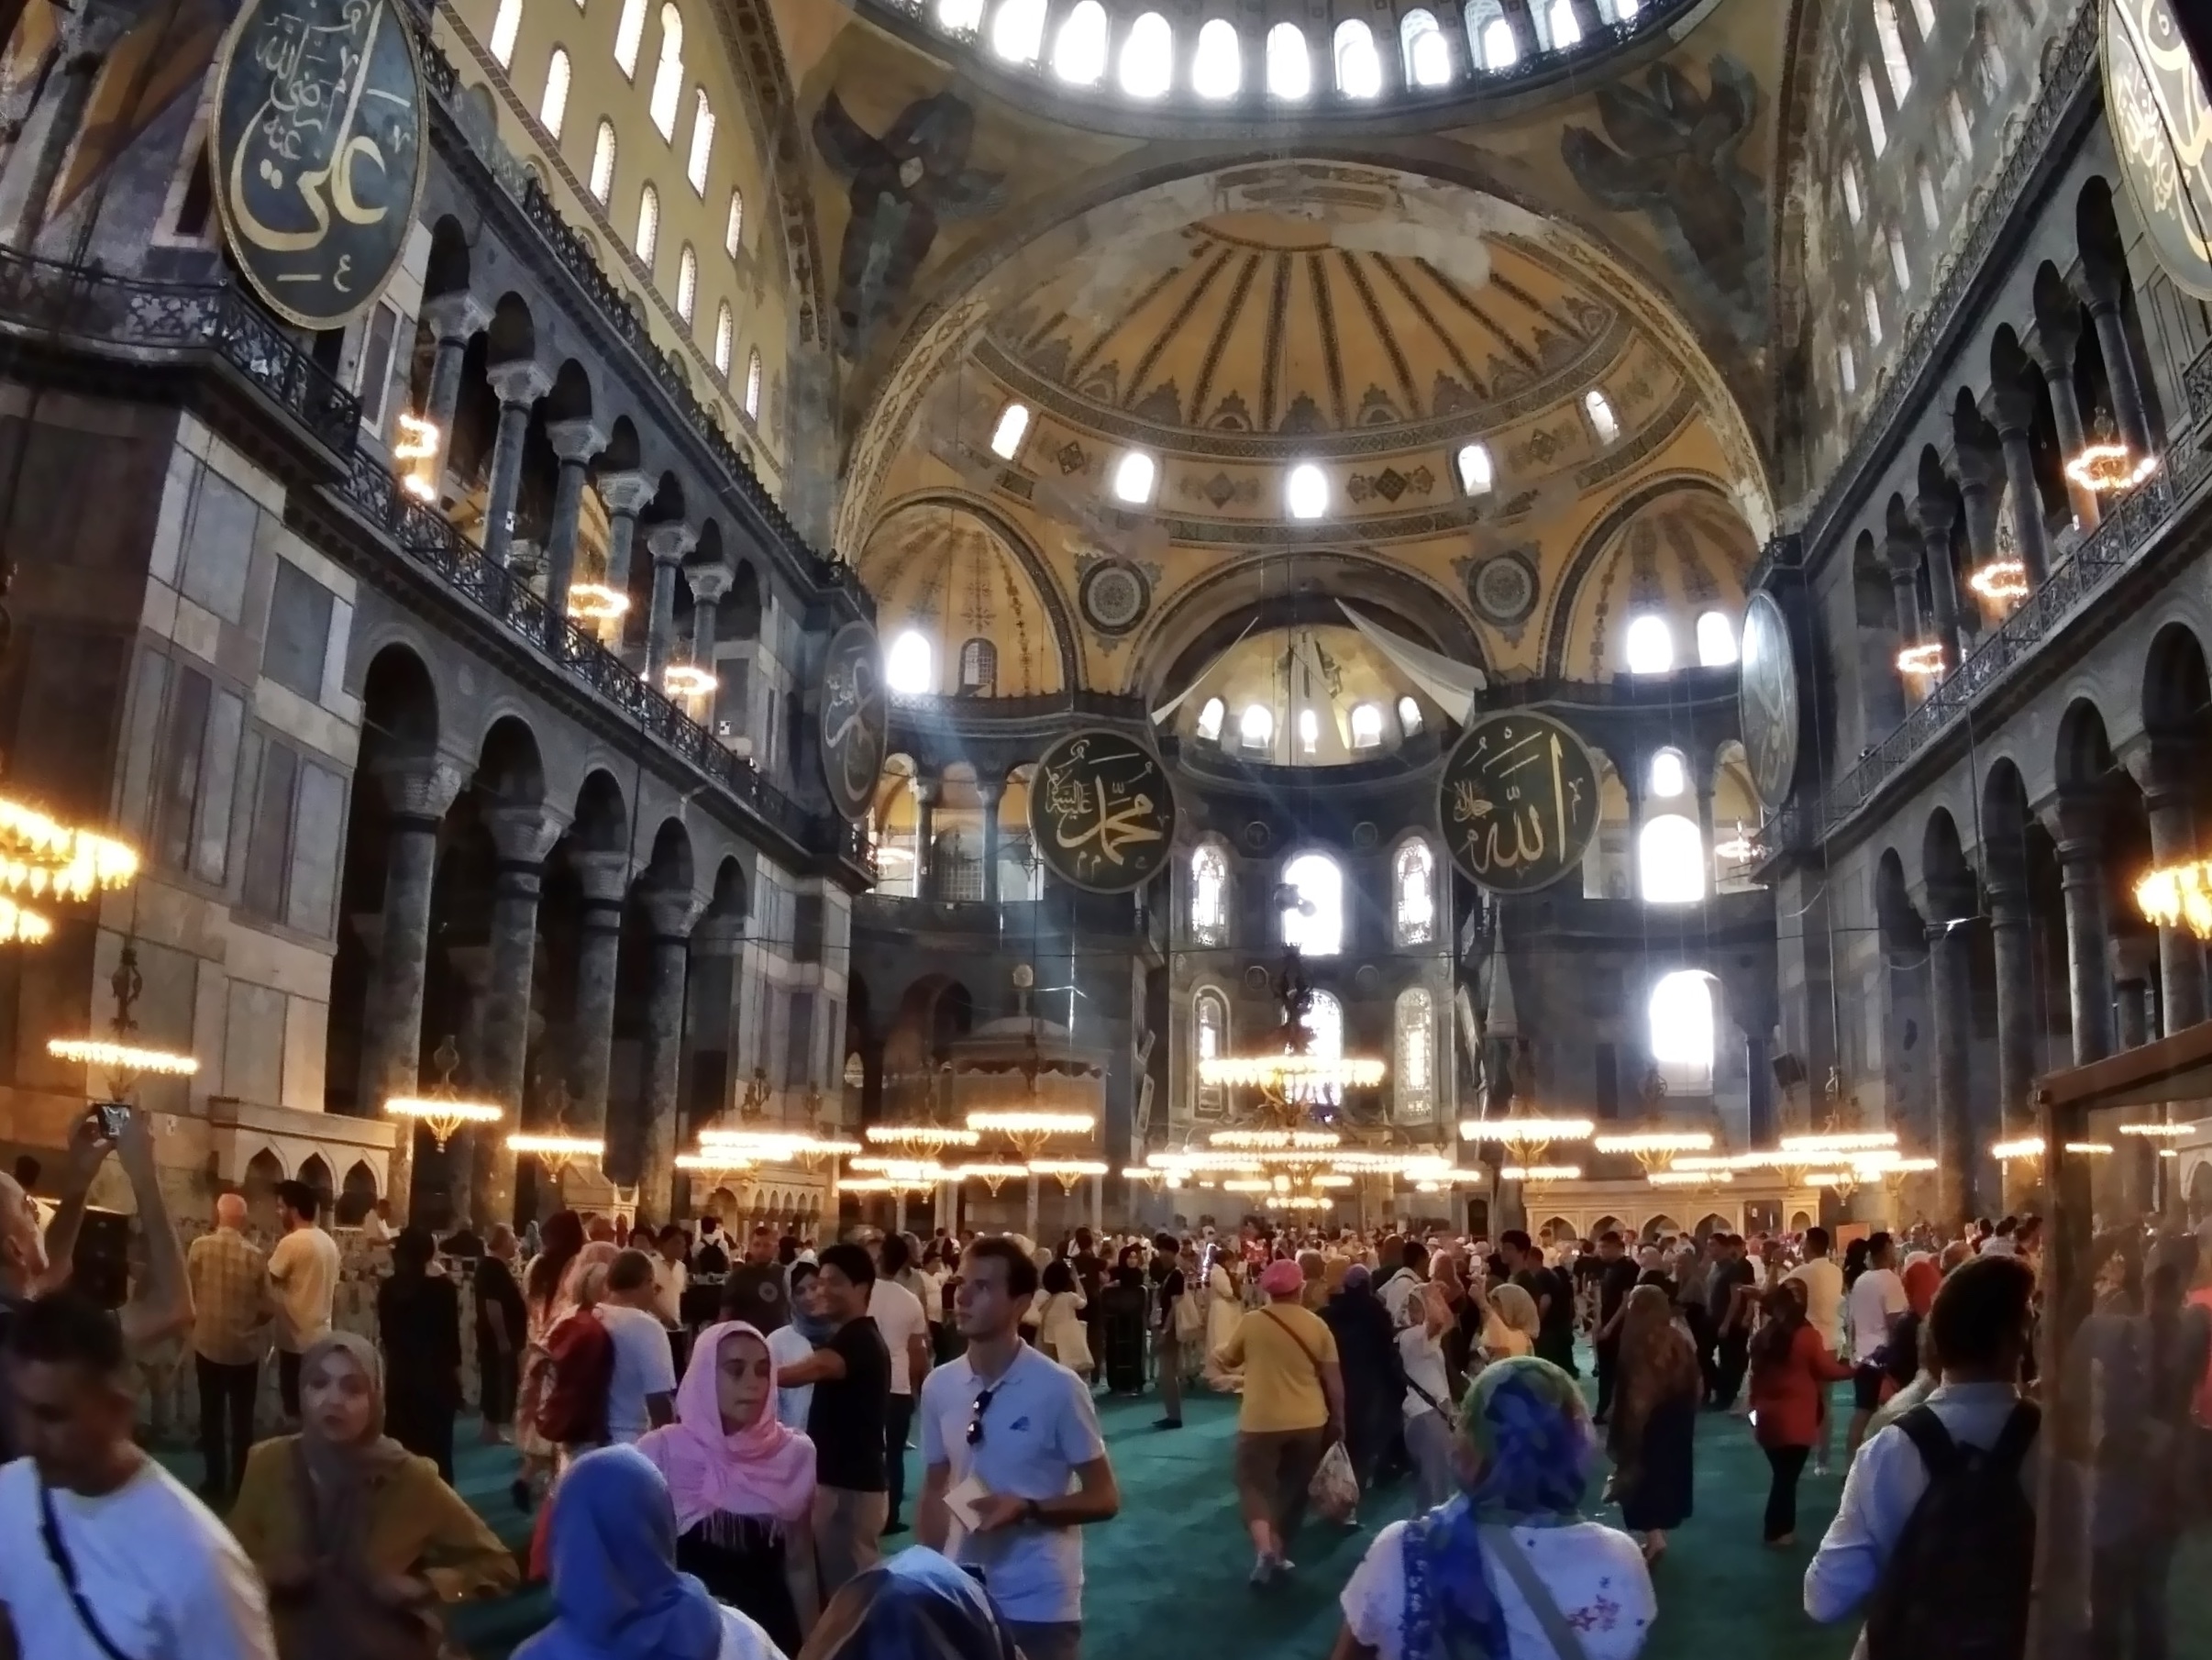 Interior of a large mosque in Istanbul